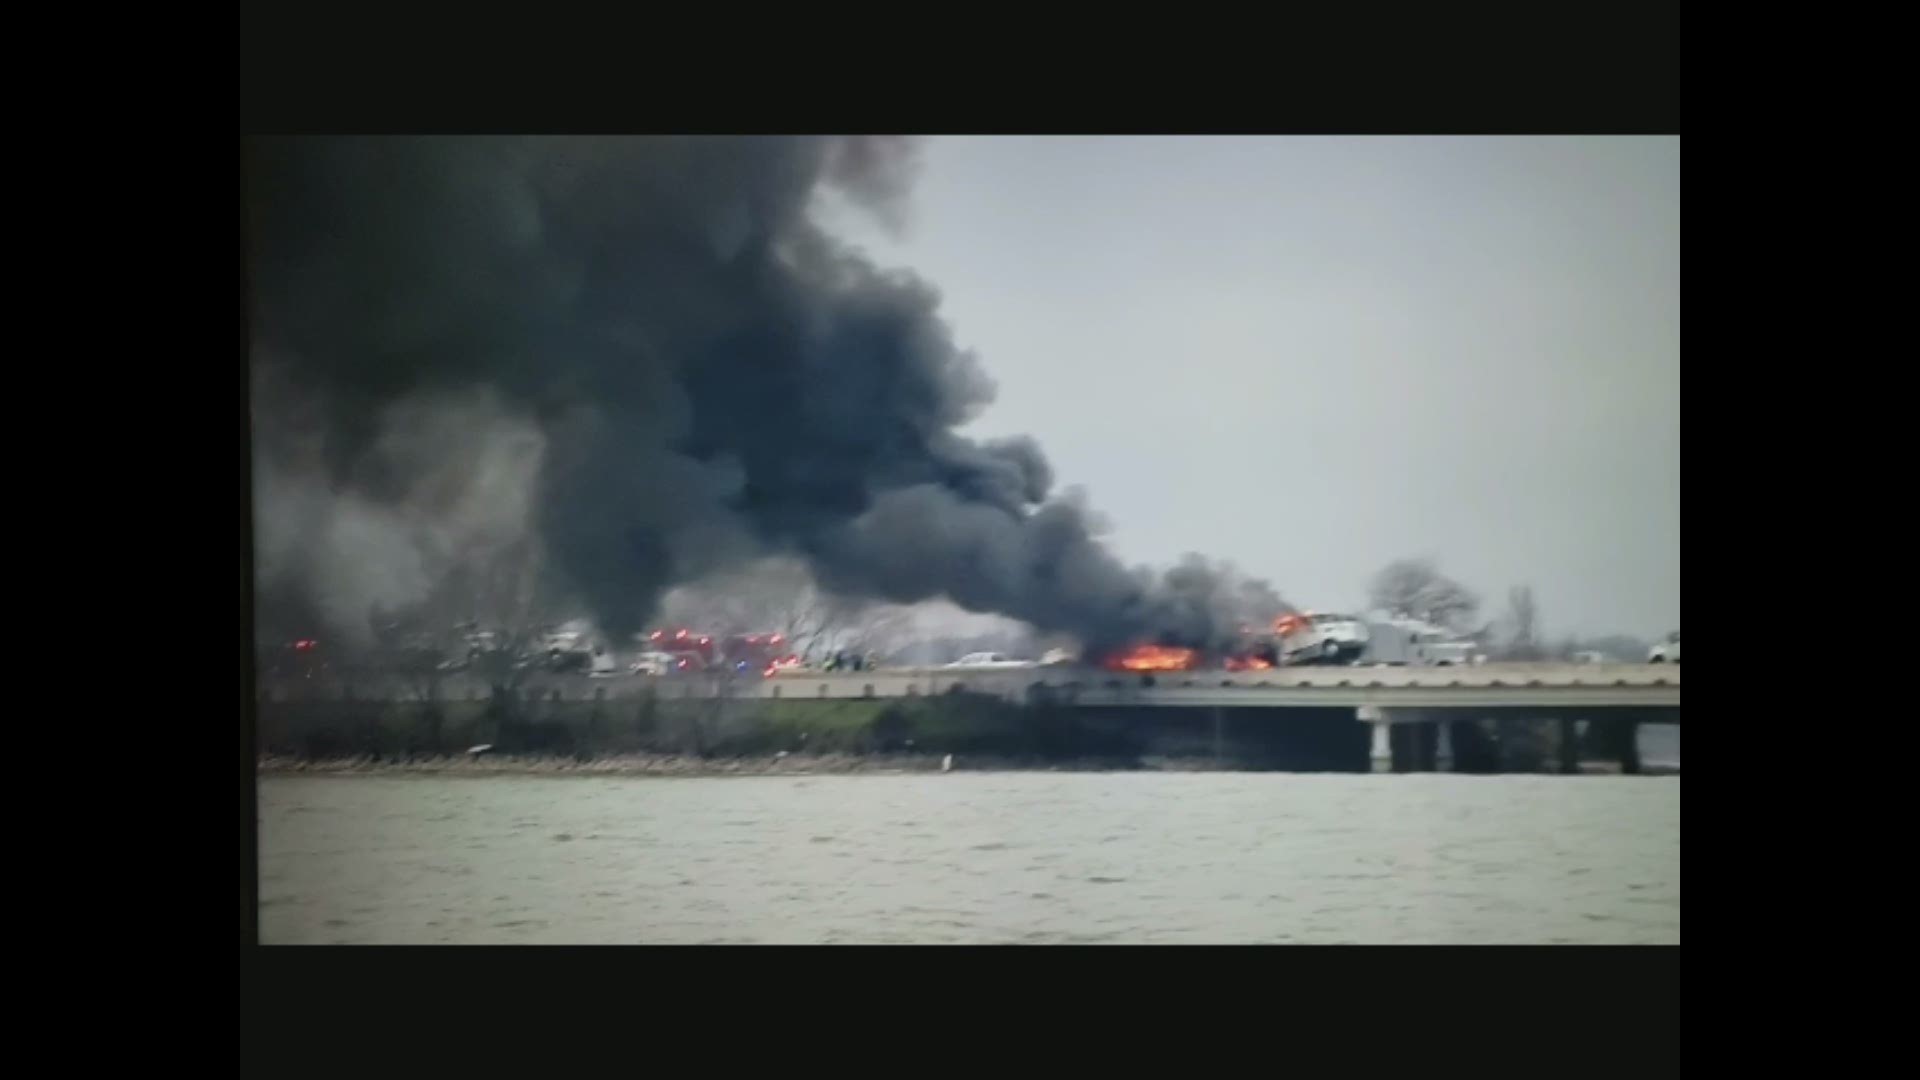 A semi-truck fire caused heavy delays on Interstate 30 over Lake Ray Hubbard